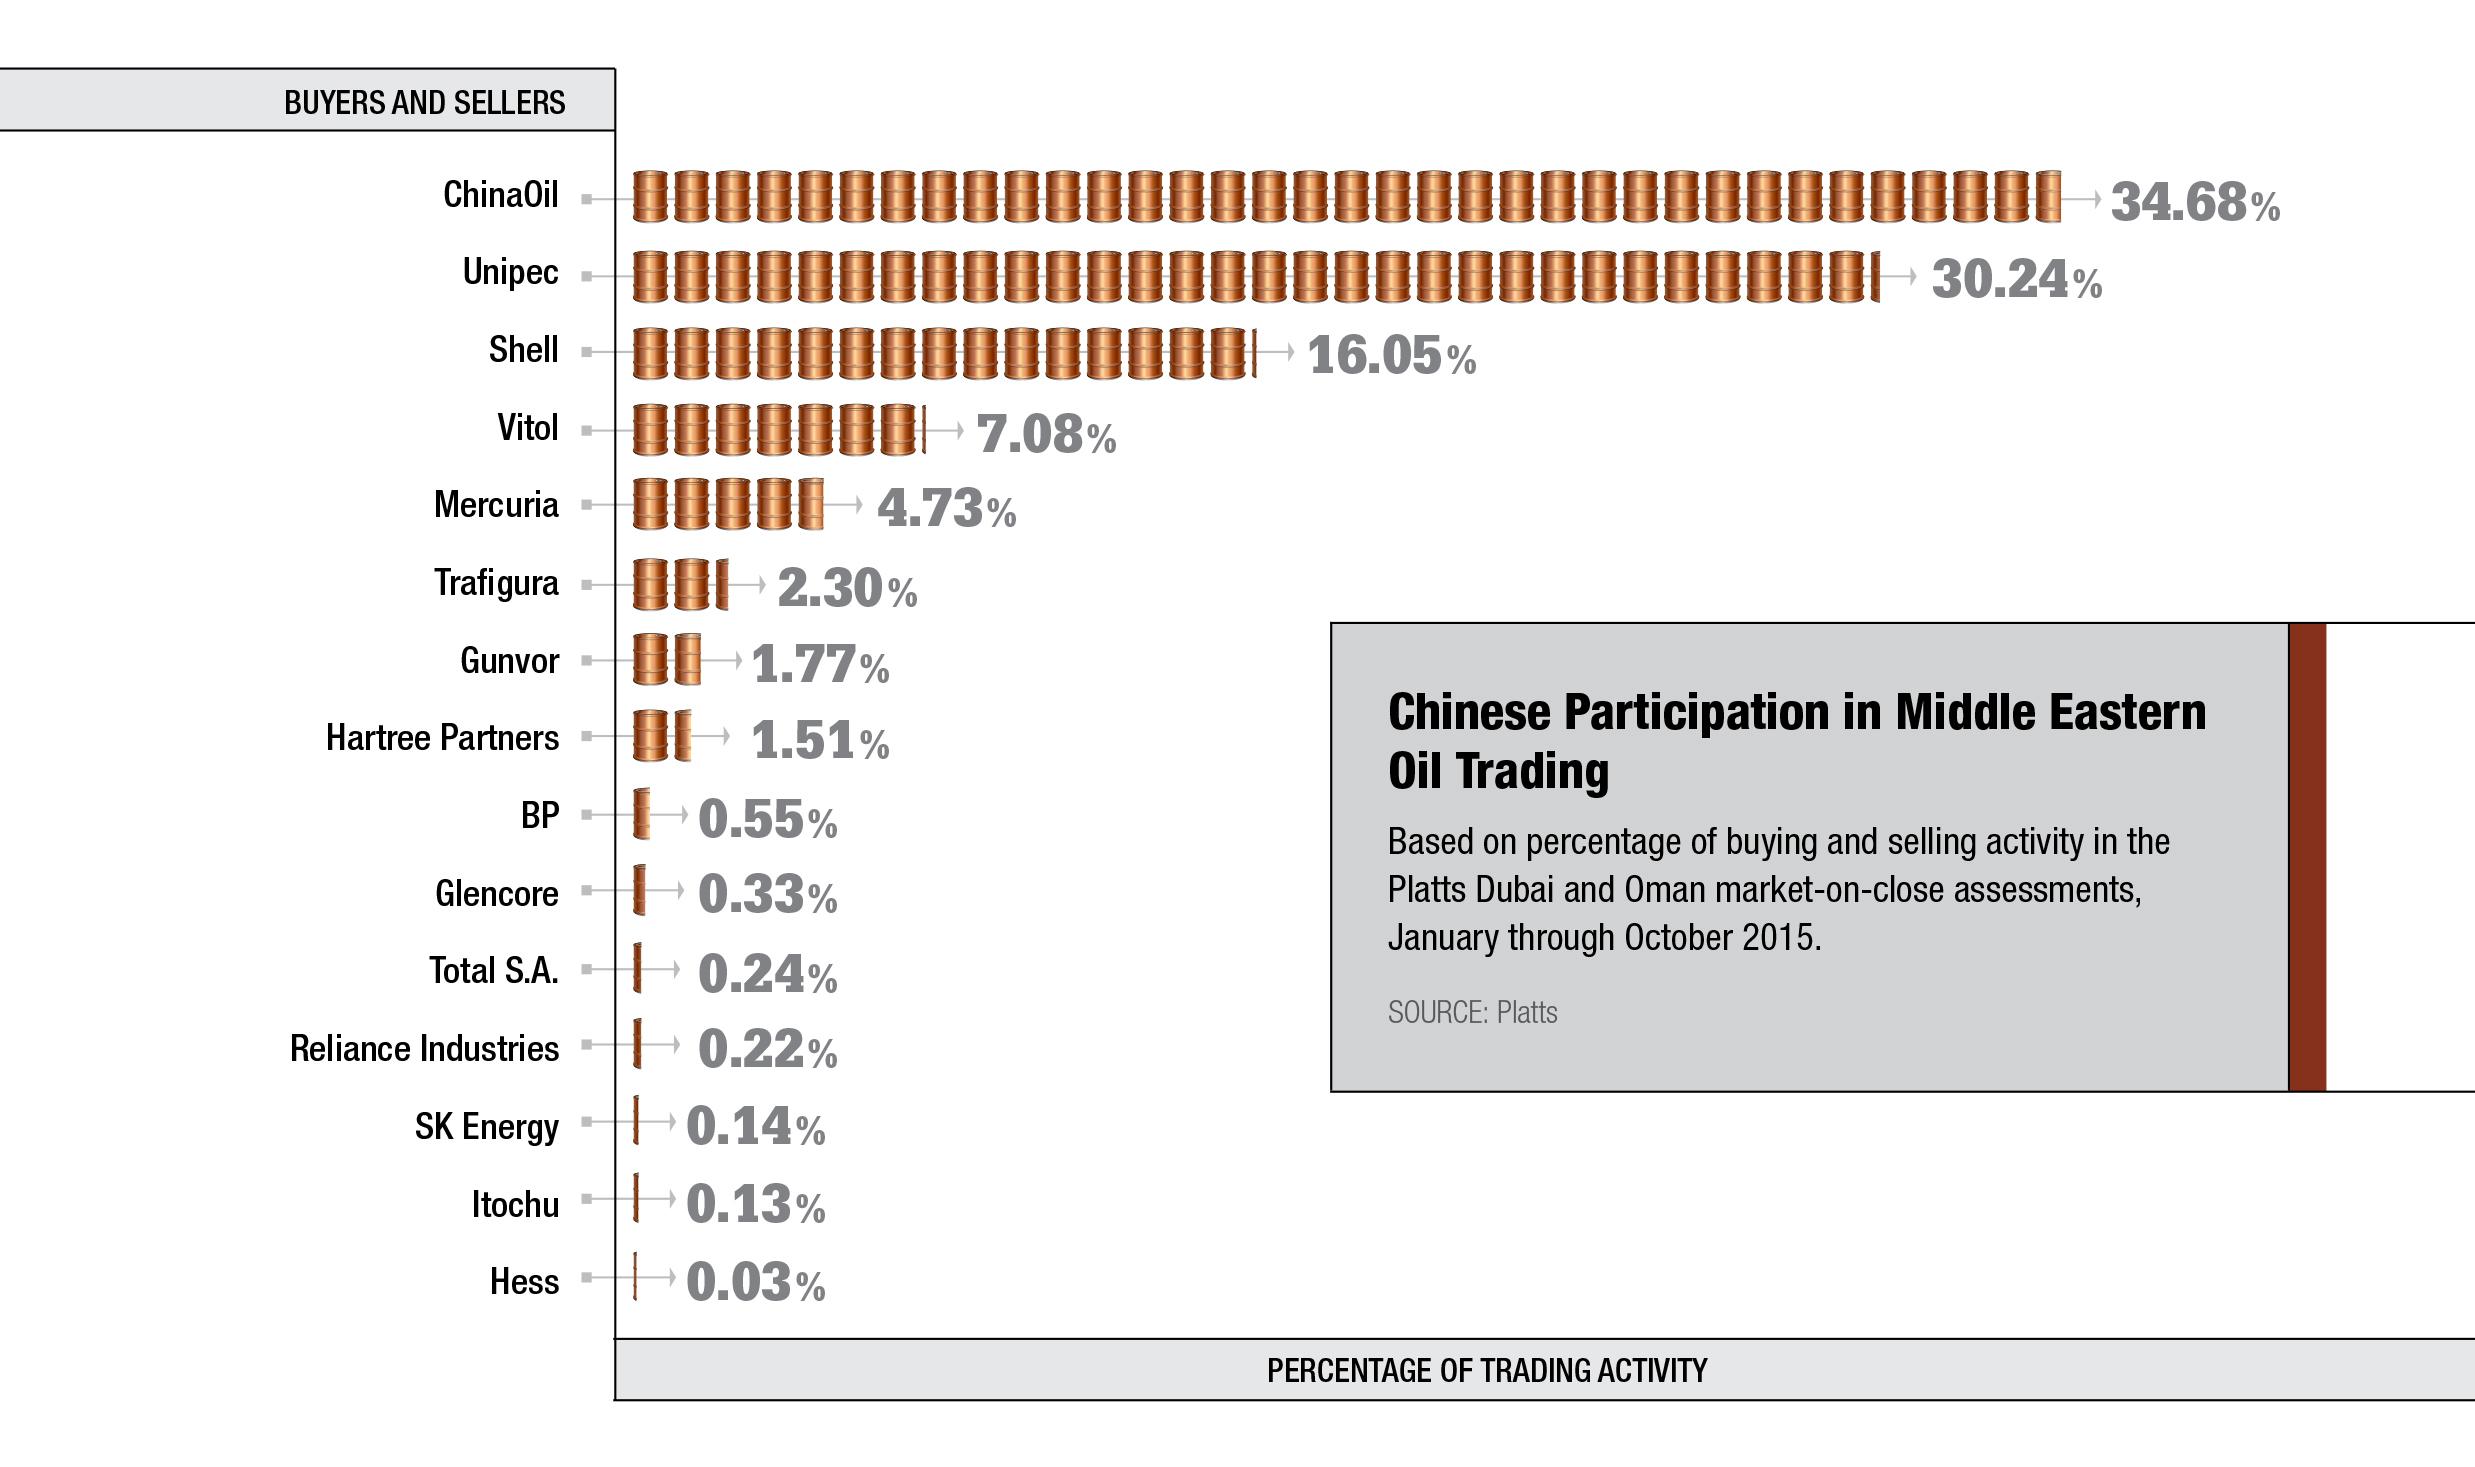 Chinese Participation in Middle Eastern Oil Trading